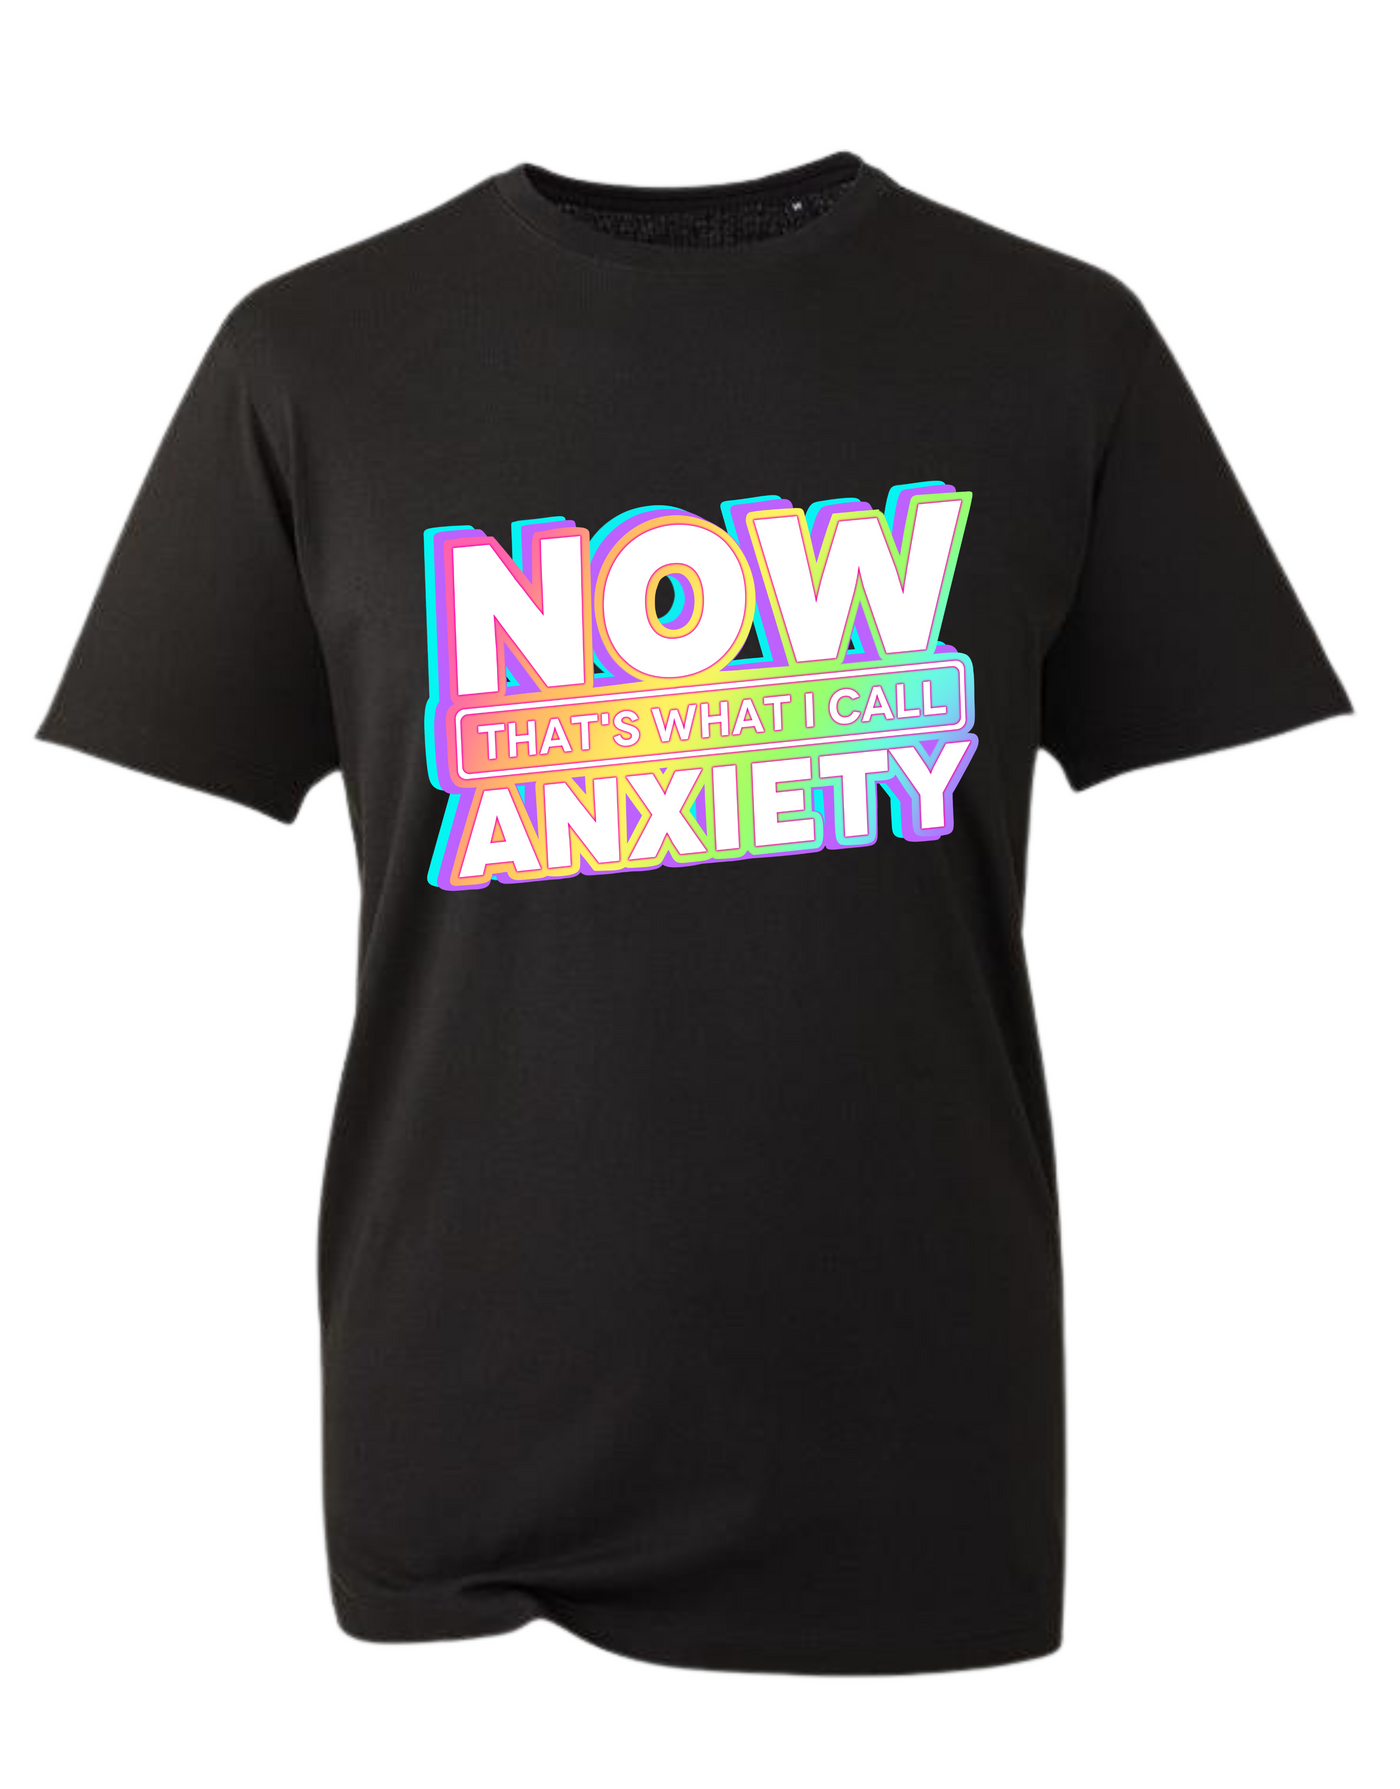 "Now That's What I Call Anxiety" Unisex Organic T-Shirt